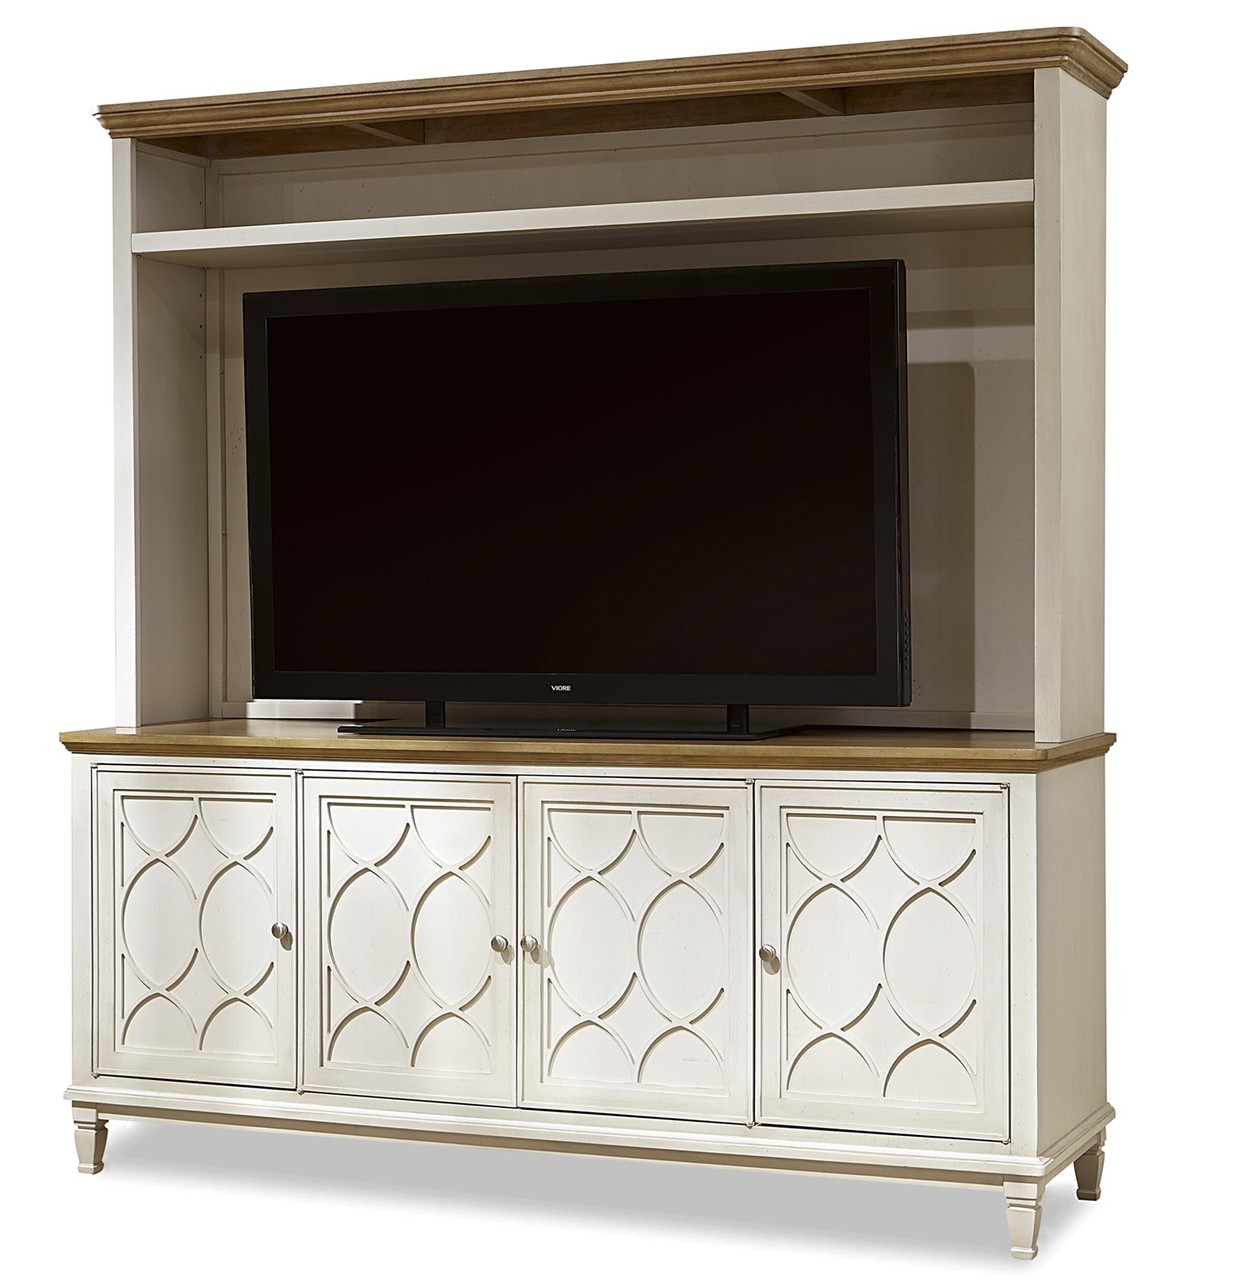 French modern wood 4 door tv media console with hutch